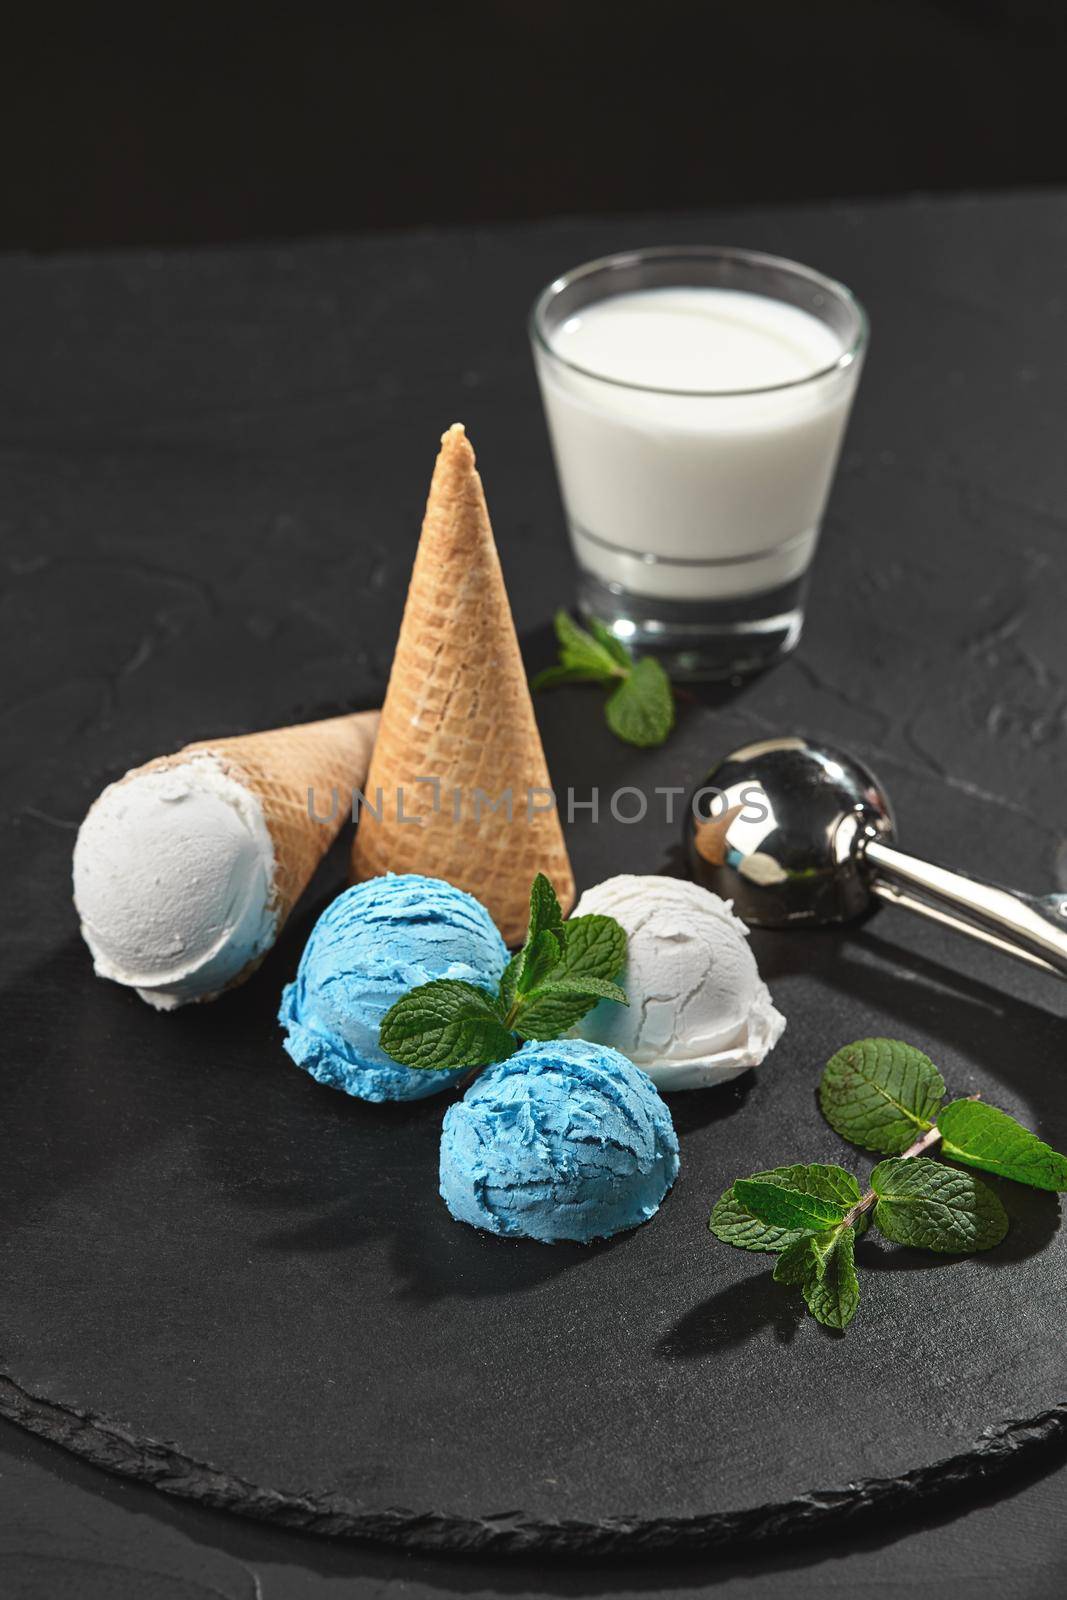 Top view of a delicious natural creamy and blueberry ice cream decorated with mint, and classic waffle cones are served on a stone slate, standing on a dark table over a black background. Metal scoop and a glass of milk is nearby. Close-up shot.